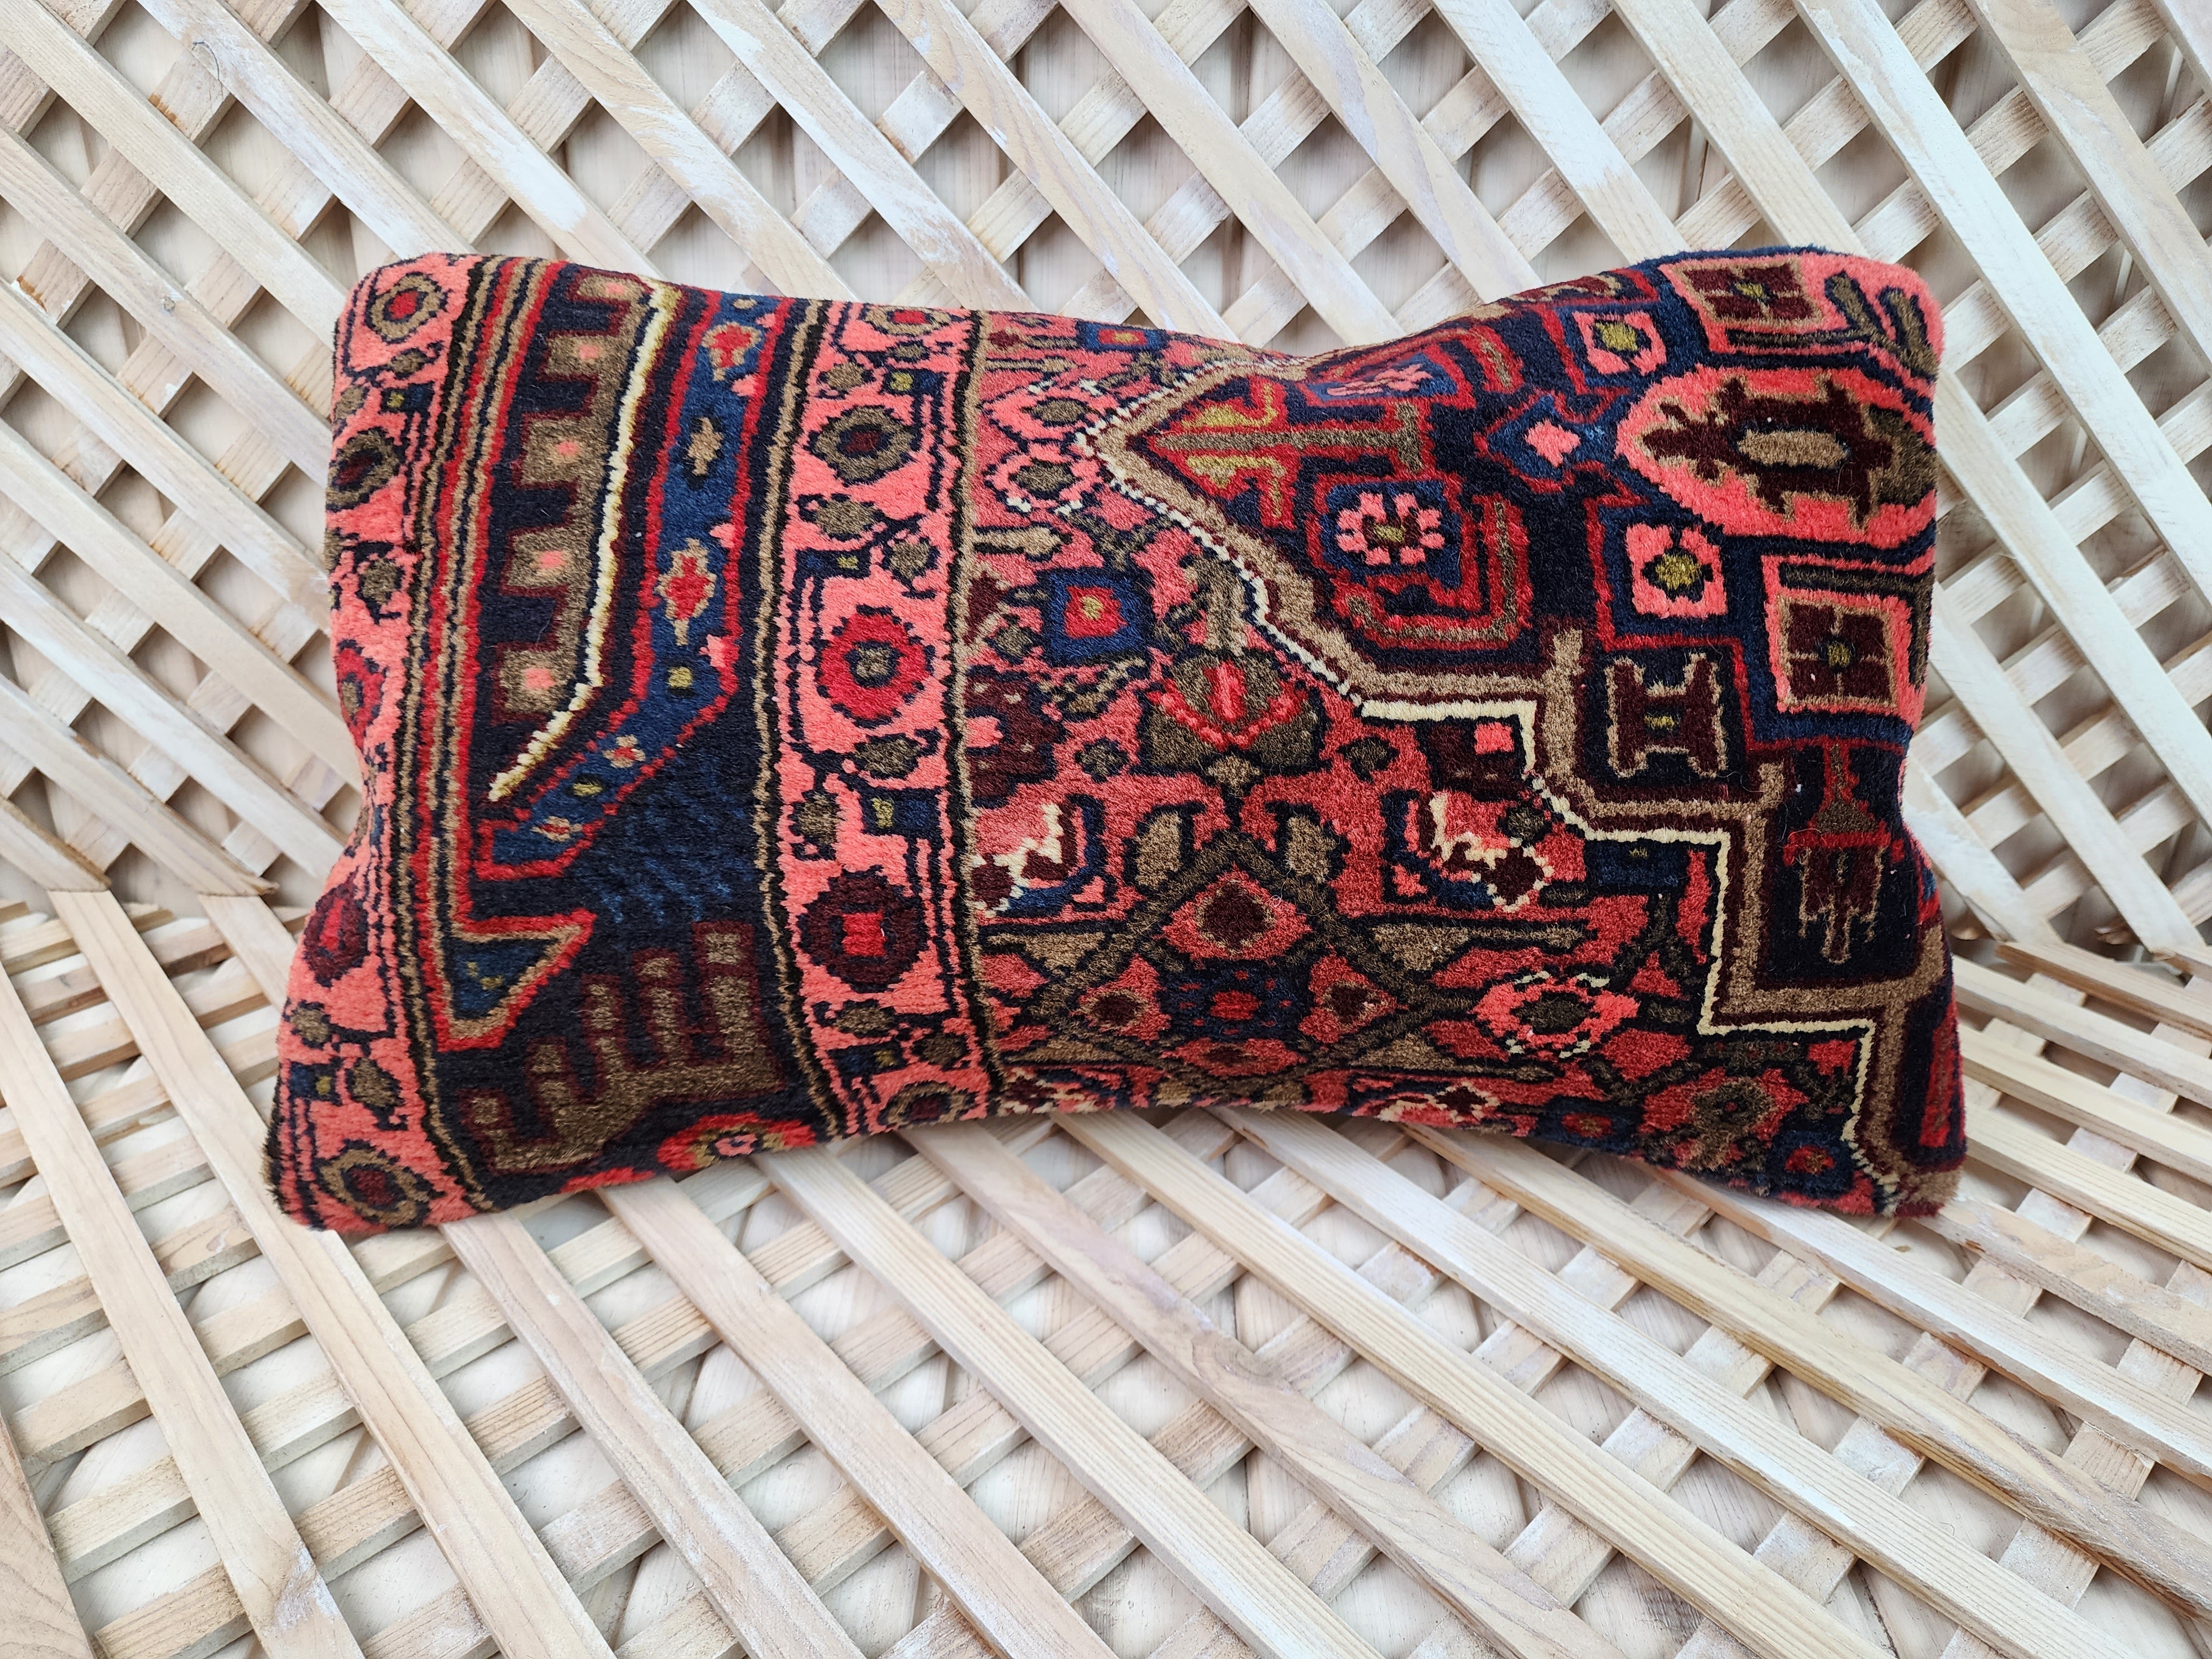 Vintage Persian Carpet Pillow Cover 12x20 inch